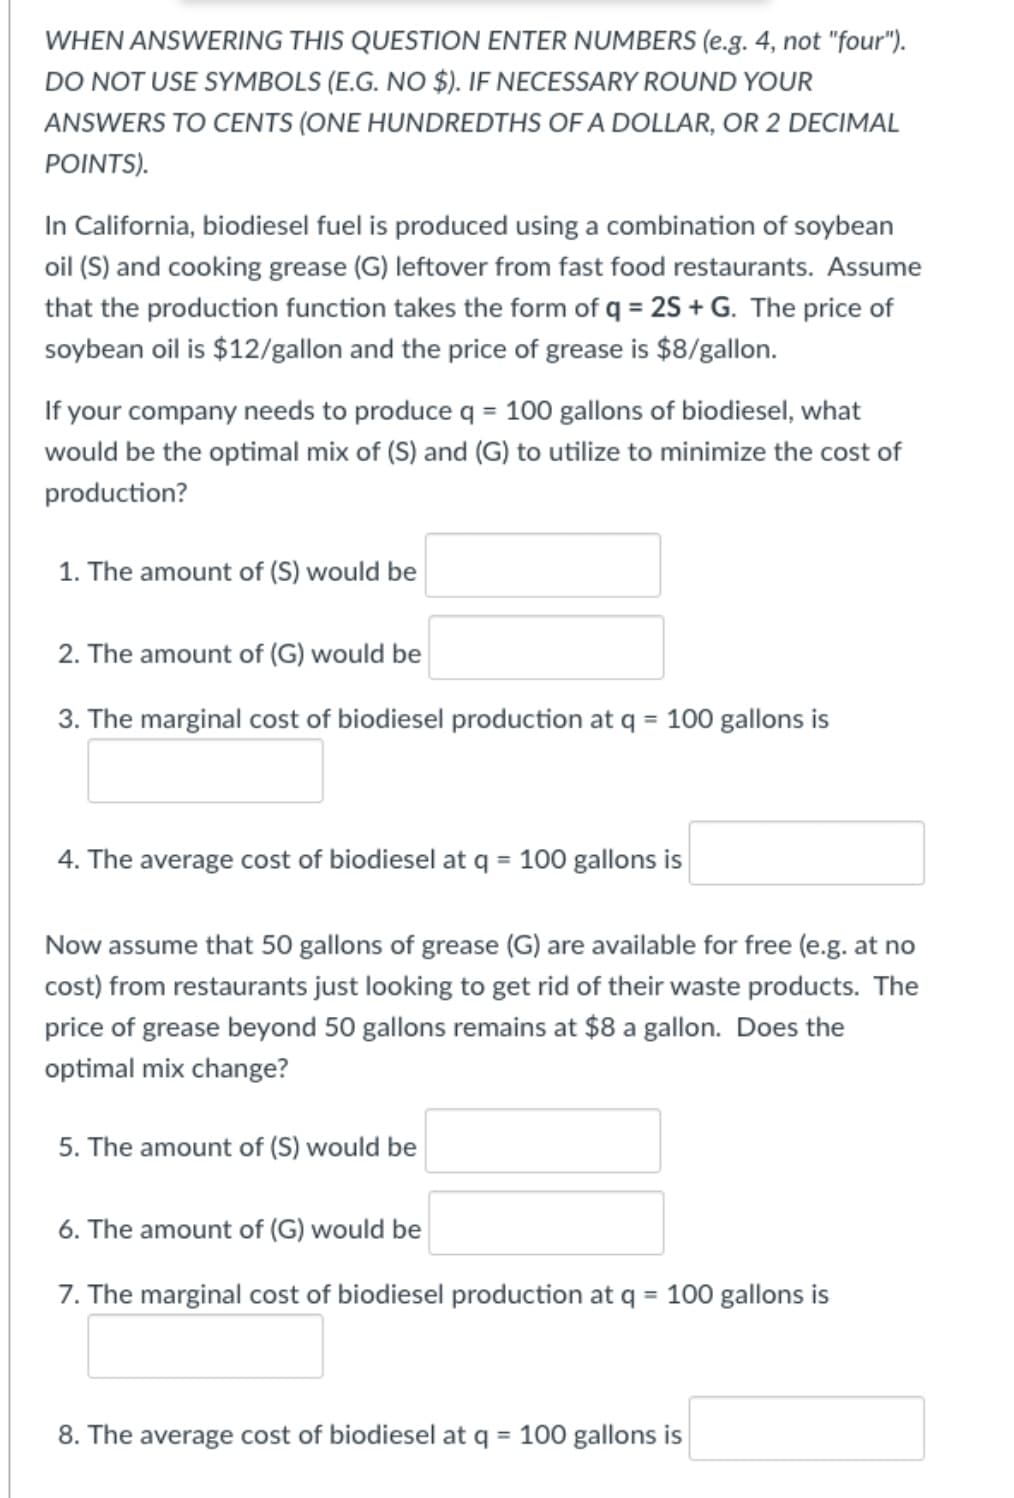 WHEN ANSWERING THIS QUESTION ENTER NUMBERS (e.g. 4, not "four").
DO NOT USE SYMBOLS (E.G. NO $). IF NECESSARY ROUND YOUR
ANSWERS TO CENTS (ONE HUNDREDTHS OF A DOLLAR, OR 2 DECIMAL
POINTS).
In California, biodiesel fuel is produced using a combination of soybean
oil (S) and cooking grease (G) leftover from fast food restaurants. Assume
that the production function takes the form of q = 25 + G. The price of
soybean oil is $12/gallon and the price of grease is $8/gallon.
If your company needs to produce q = 100 gallons of biodiesel, what
would be the optimal mix of (S) and (G) to utilize to minimize the cost of
production?
1. The amount of (S) would be
2. The amount of (G) would be
3. The marginal cost of biodiesel production at q = 100 gallons is
4. The average cost of biodiesel at q = 100 gallons is
%3D
Now assume that 50 gallons of grease (G) are available for free (e.g. at no
cost) from restaurants just looking to get rid of their waste products. The
price of grease beyond 50 gallons remains at $8 a gallon. Does the
optimal mix change?
5. The amount of (S) would be
6. The amount of (G) would be
7. The marginal cost of biodiesel production at q = 100 gallons is
8. The average cost of biodiesel at q = 100 gallons is
